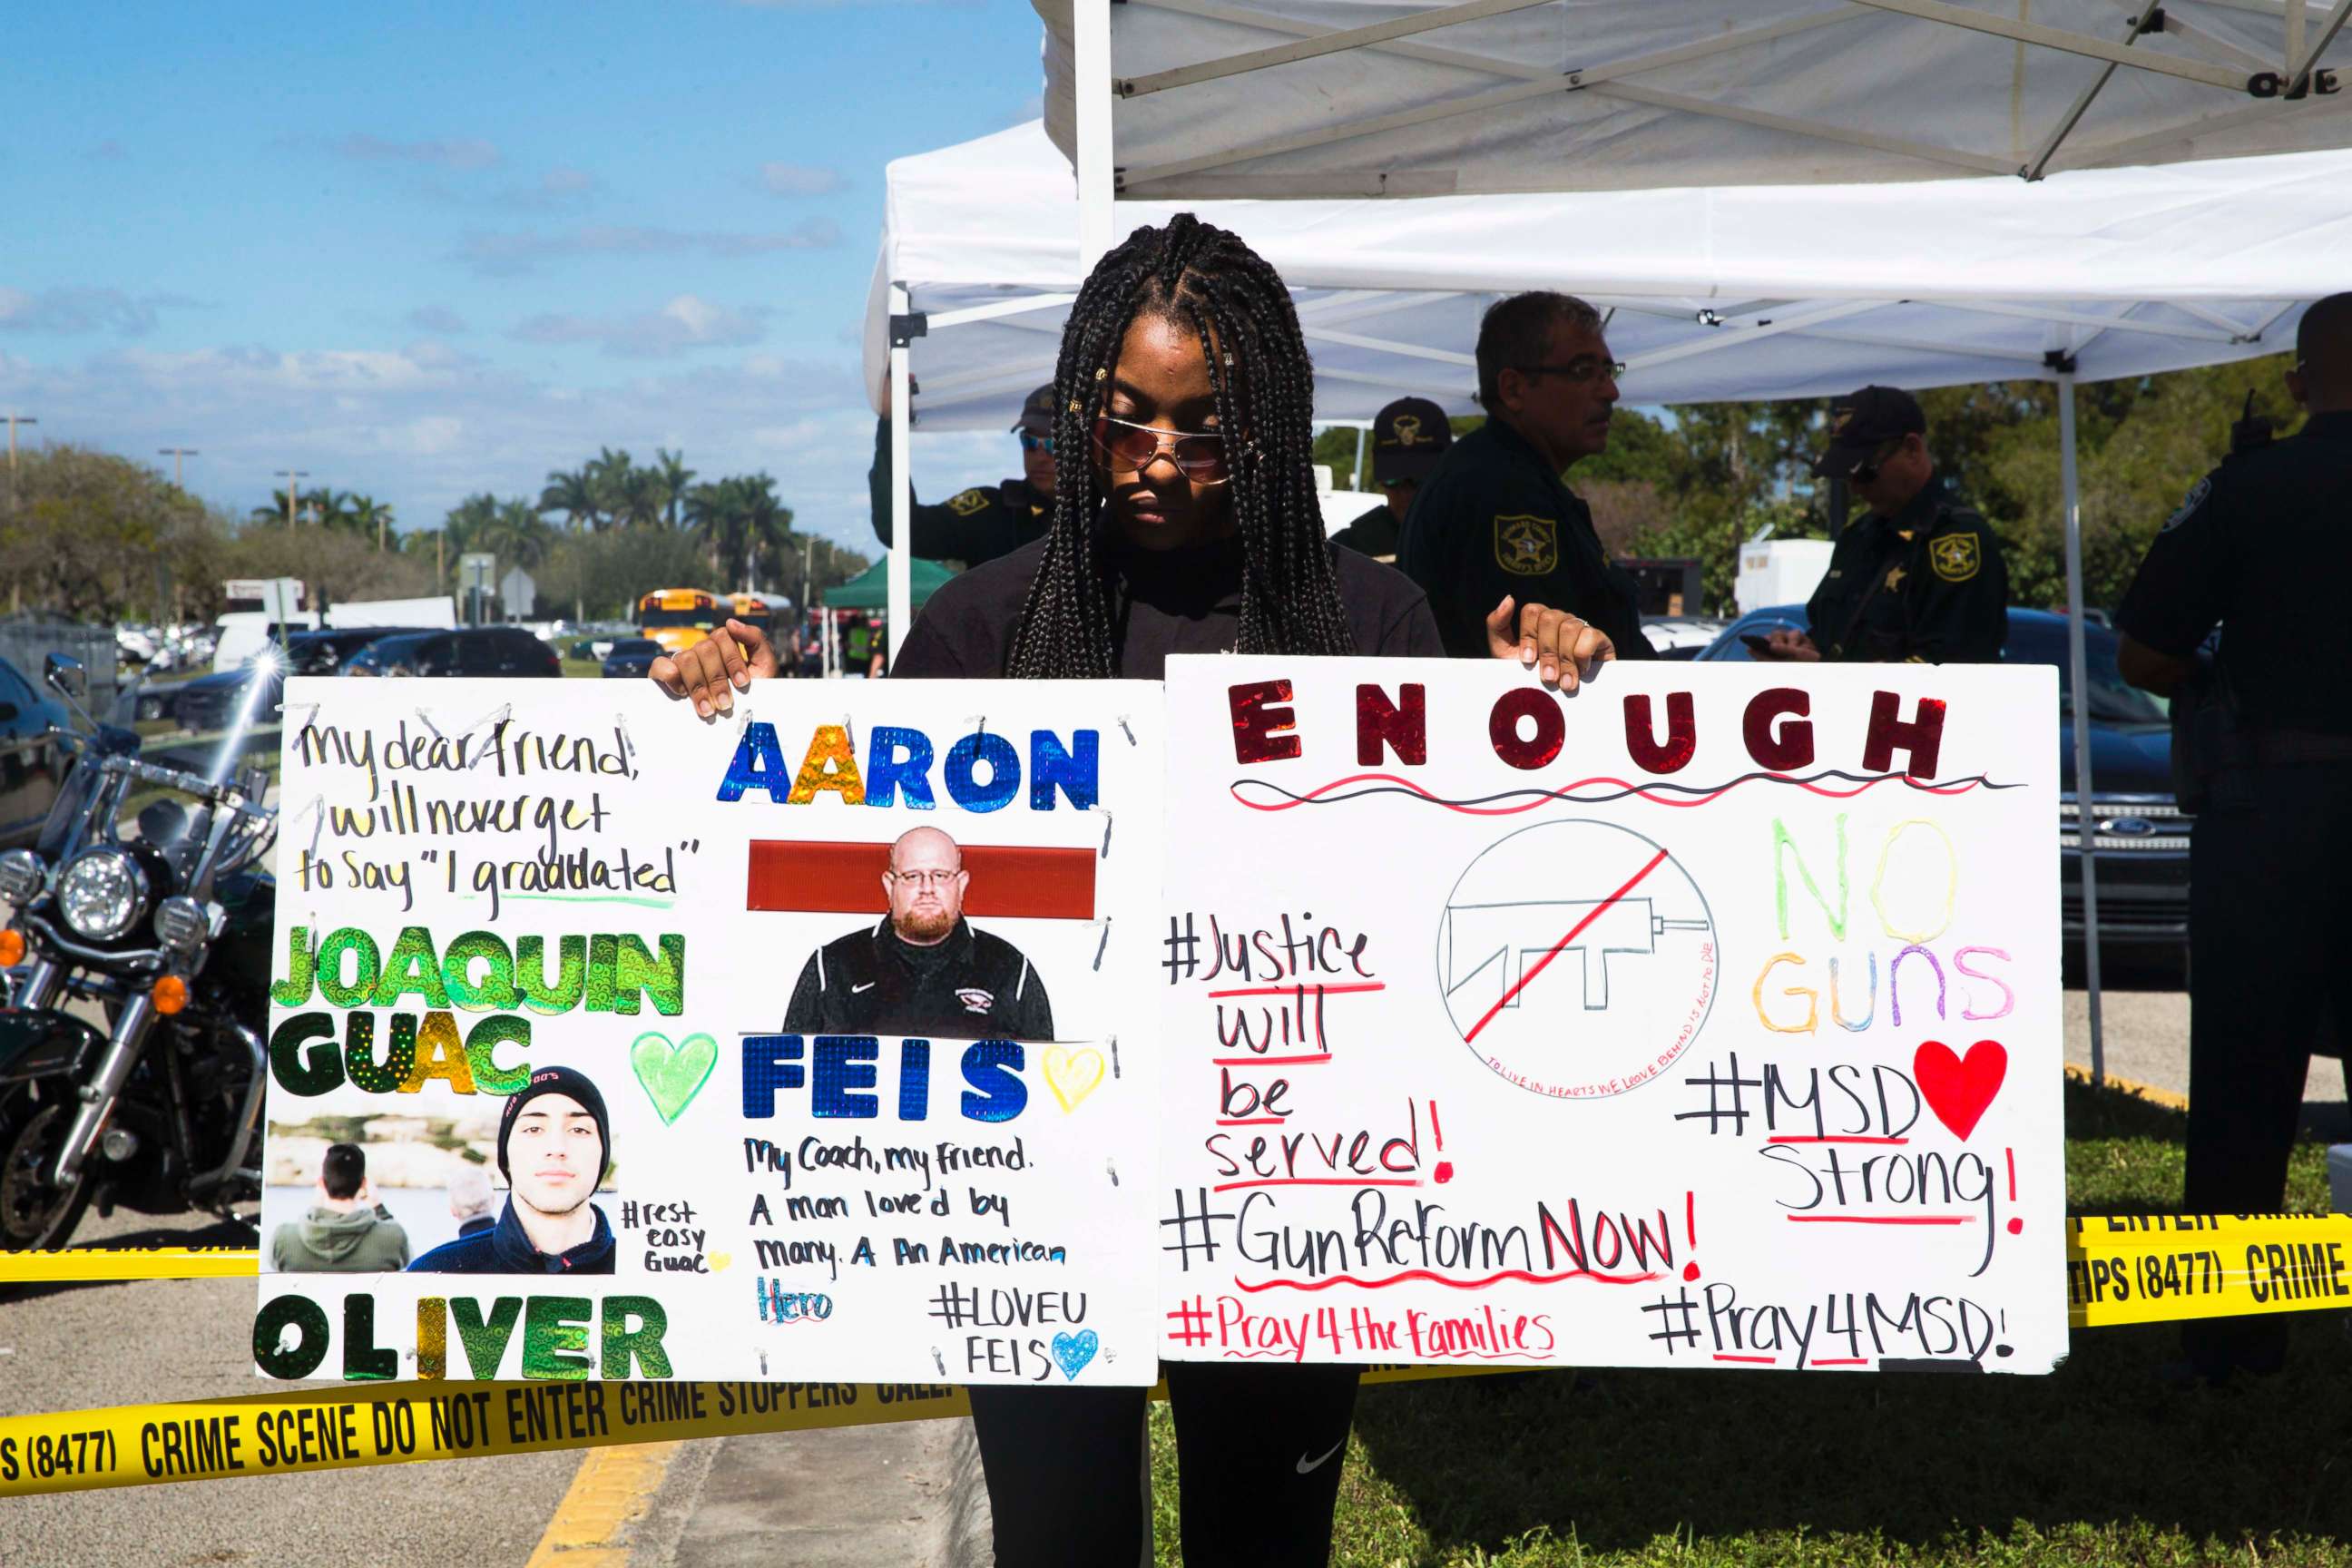 PHOTO: Tyra Hemats, 19, a 12th grader at Marjory Stoneman Douglas High School, stands with signs, one advocating for gun reform and another honoring her coach and friend, both of whom were killed in Wednesday's shooting, on Feb. 15, 2018. 